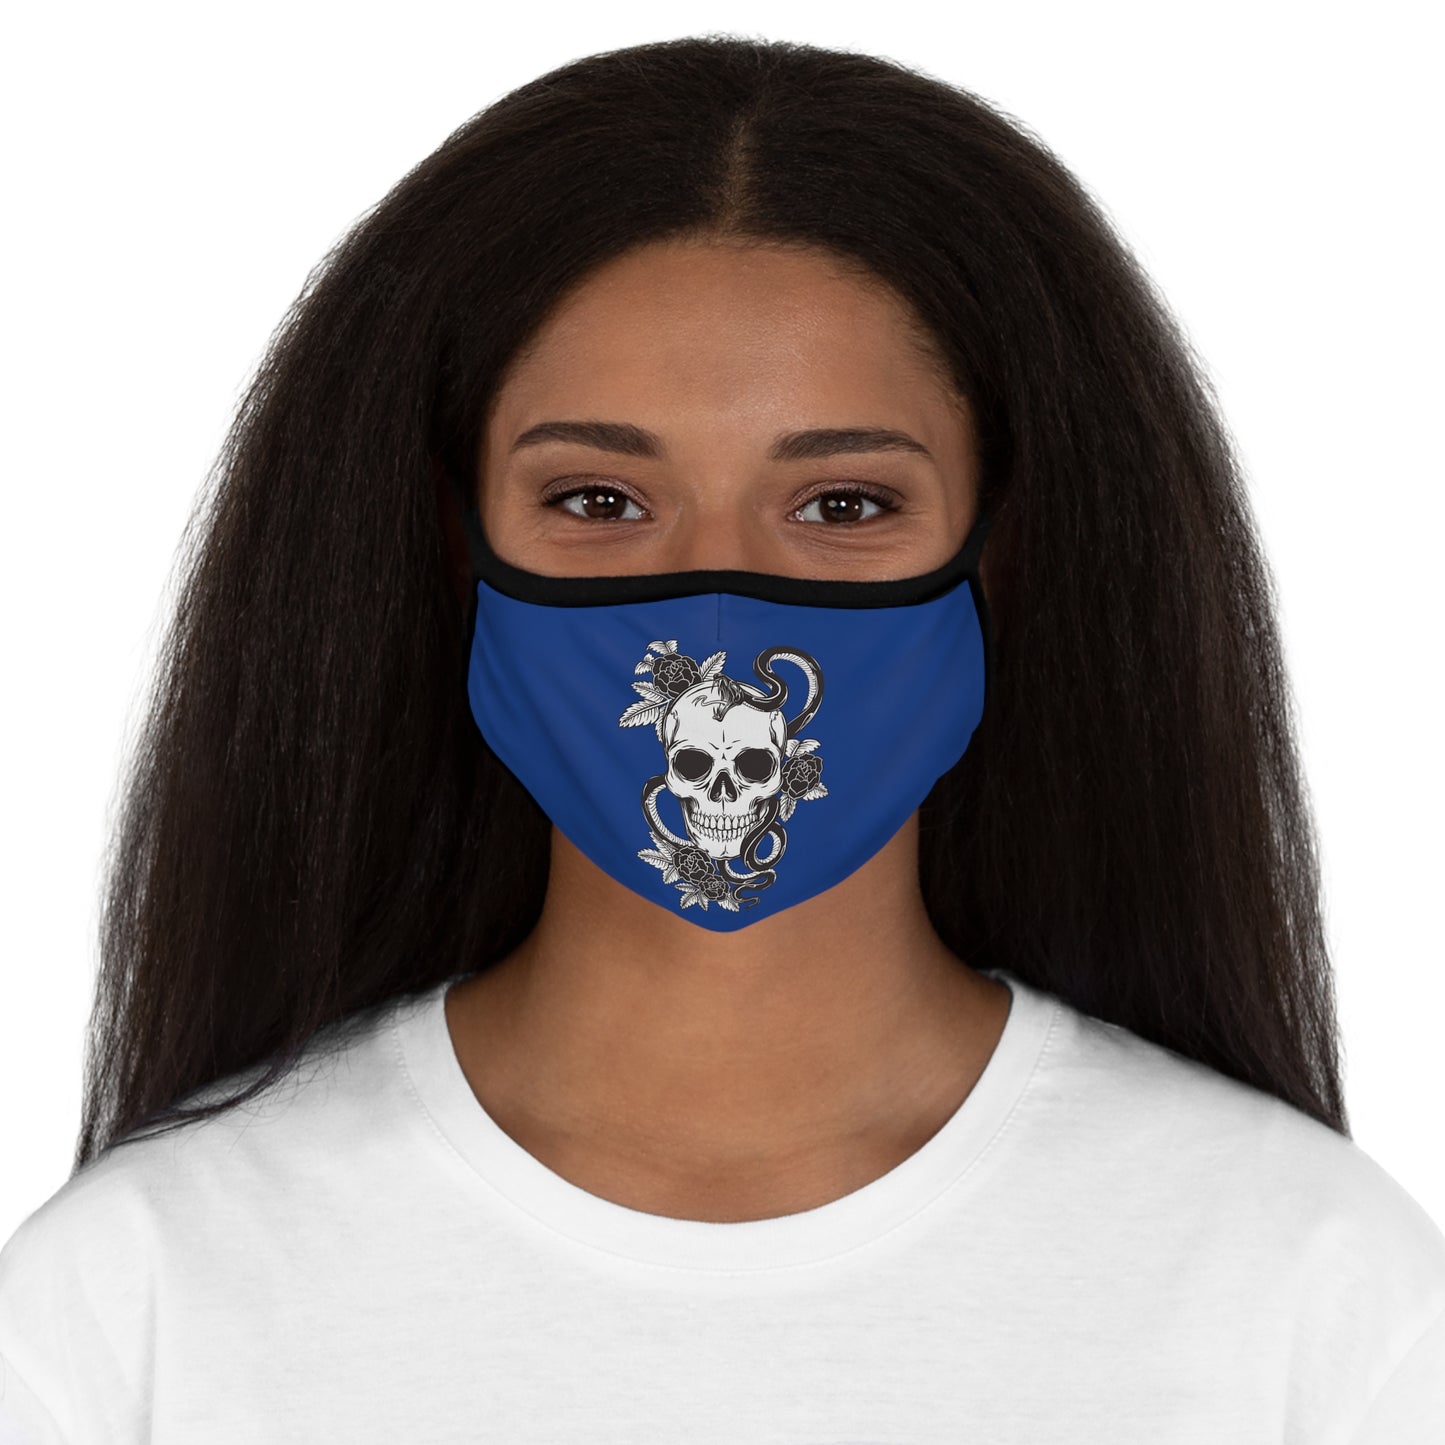 Skull with Snake Fitted Polyester Face Mask, Dark Blue Mask